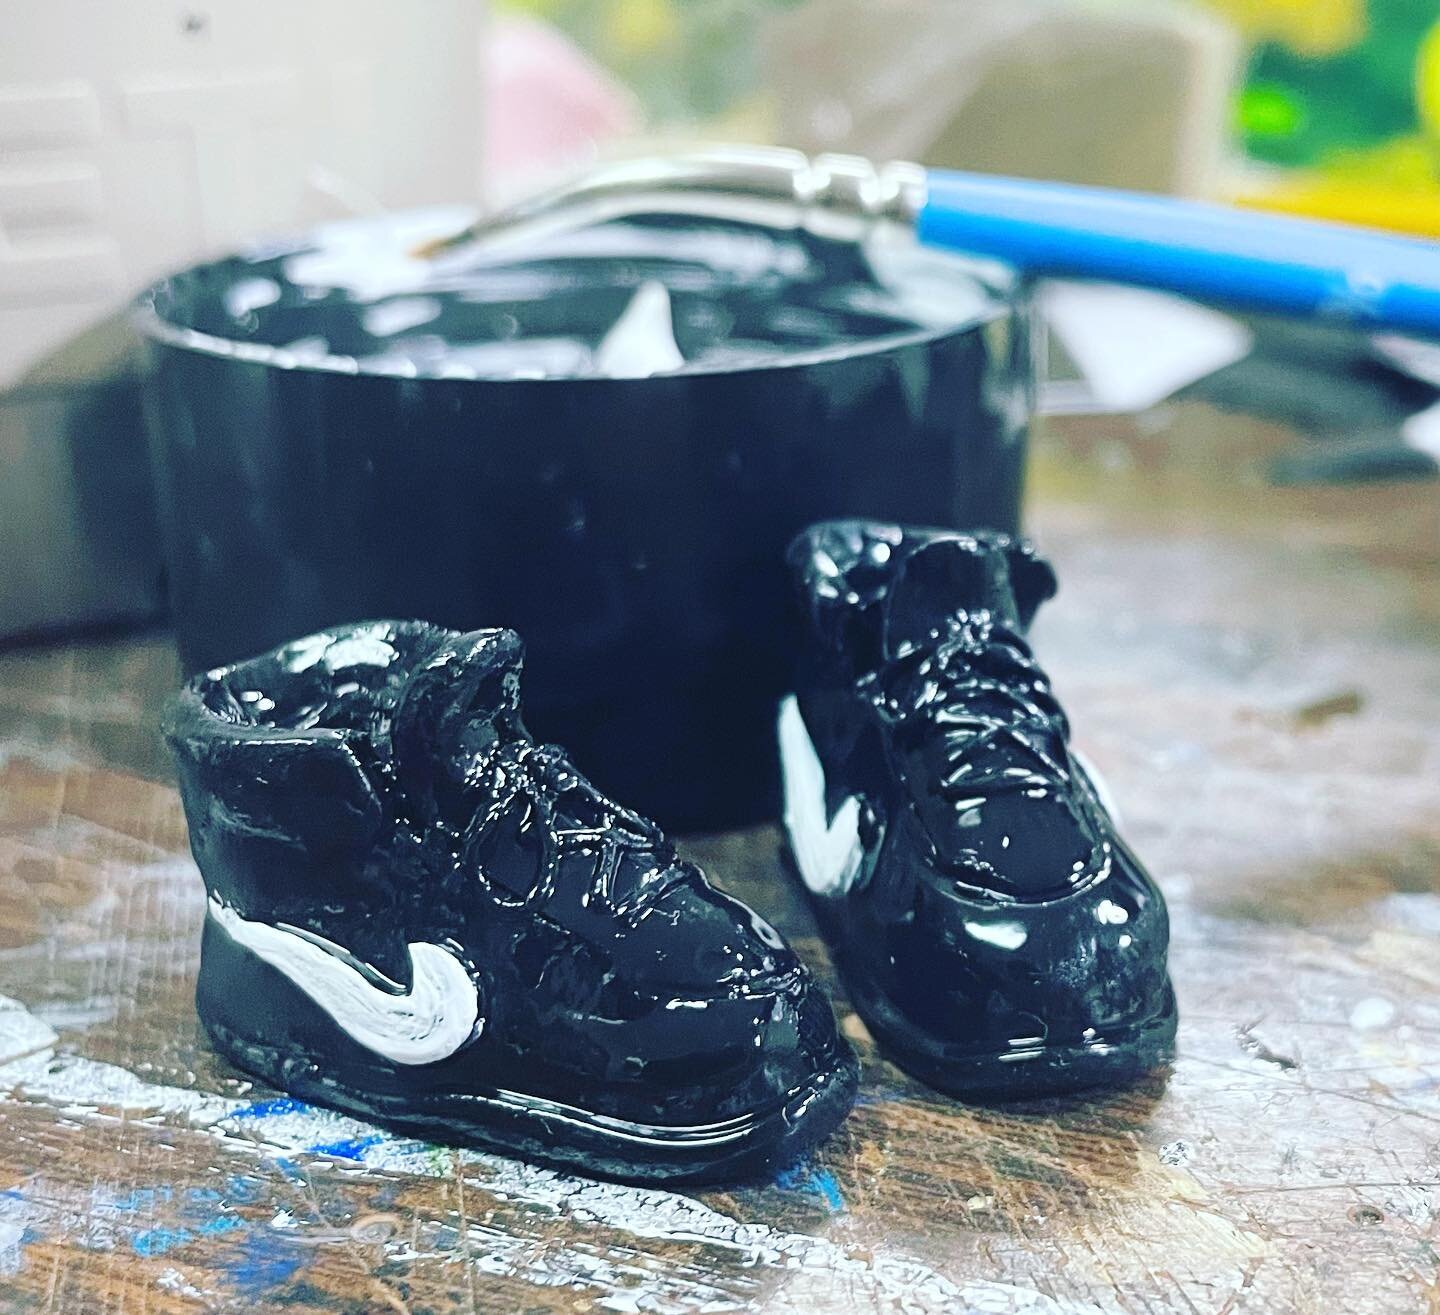 I bet you $20 I know where you got them shoes!

#alltmontsculptures #sculptureswithcaricature #sculpey_official #sculpey_polyform #nike #cleets #nfl #gymshoes #gymshwagg #hightops #alltmontsframing #tinydetails #commissions #commissionedart #uniquesc